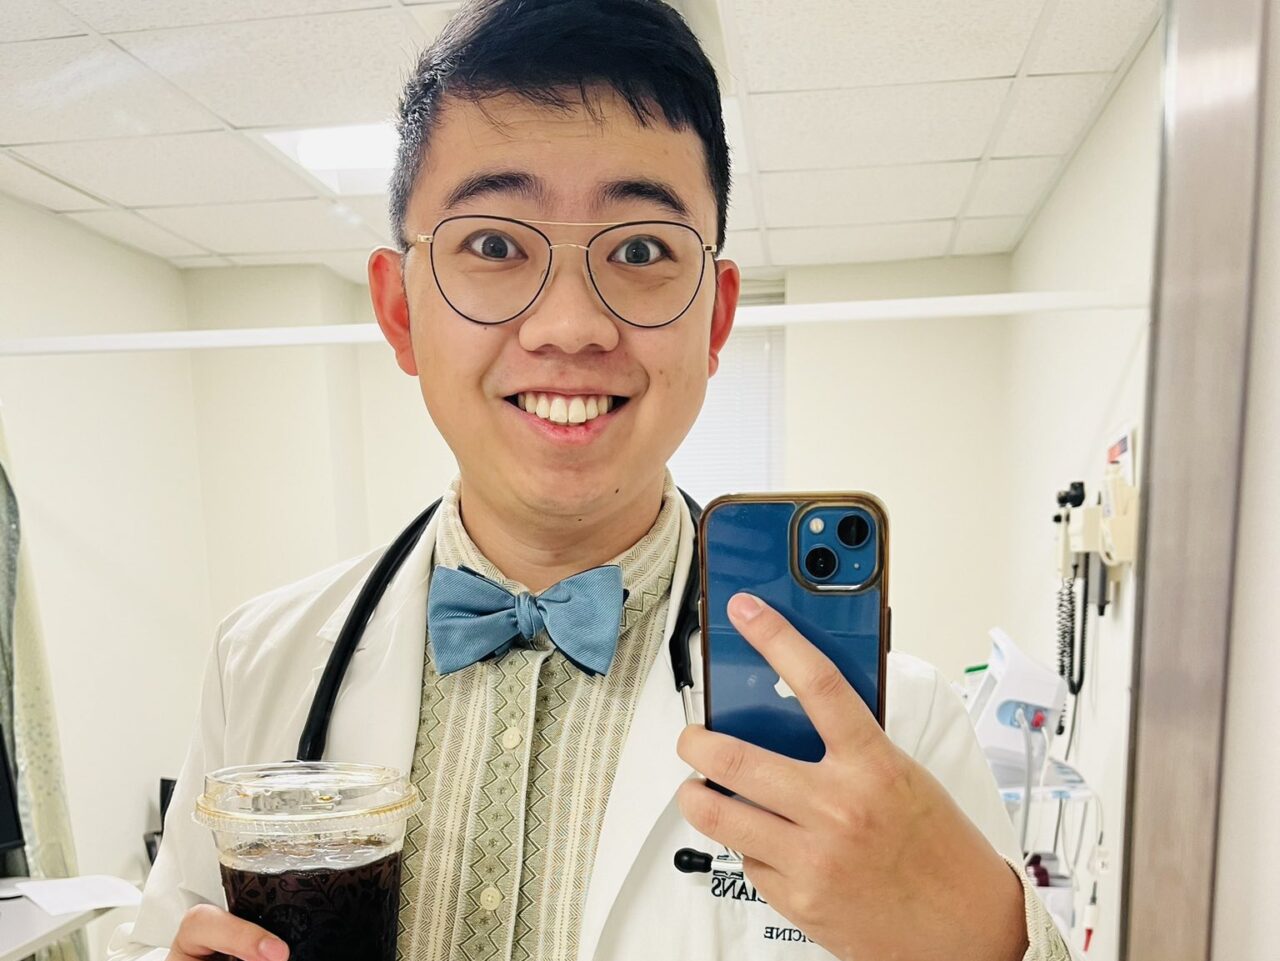 James Wu: Ready for a full day with my bowtie and coffee